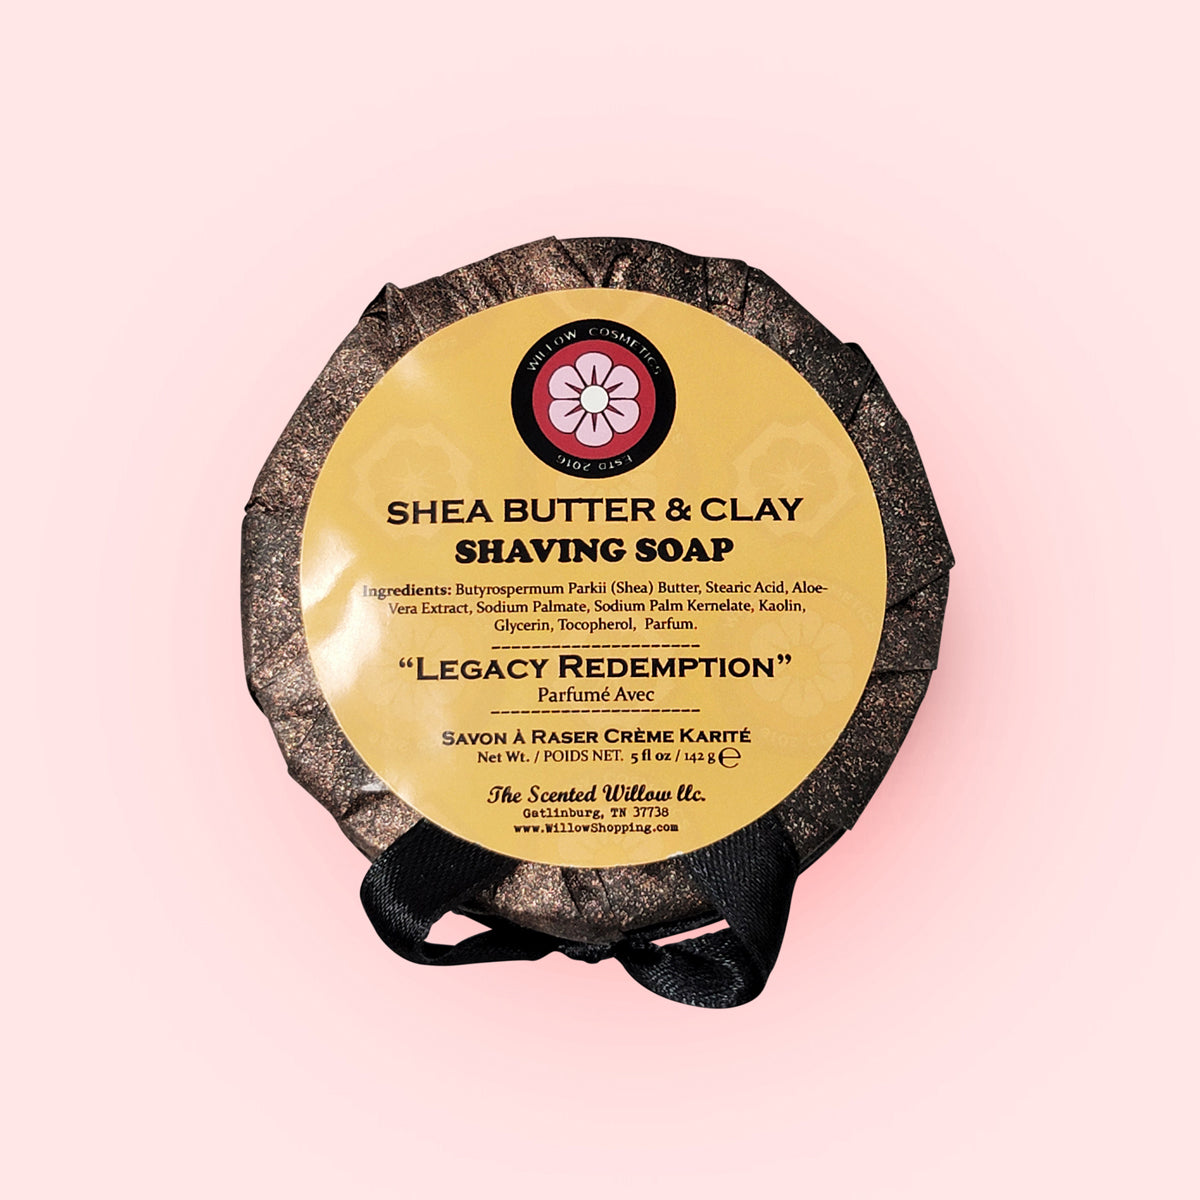 Shea Butter & Clay Shaving Soap "Legacy Redemption"